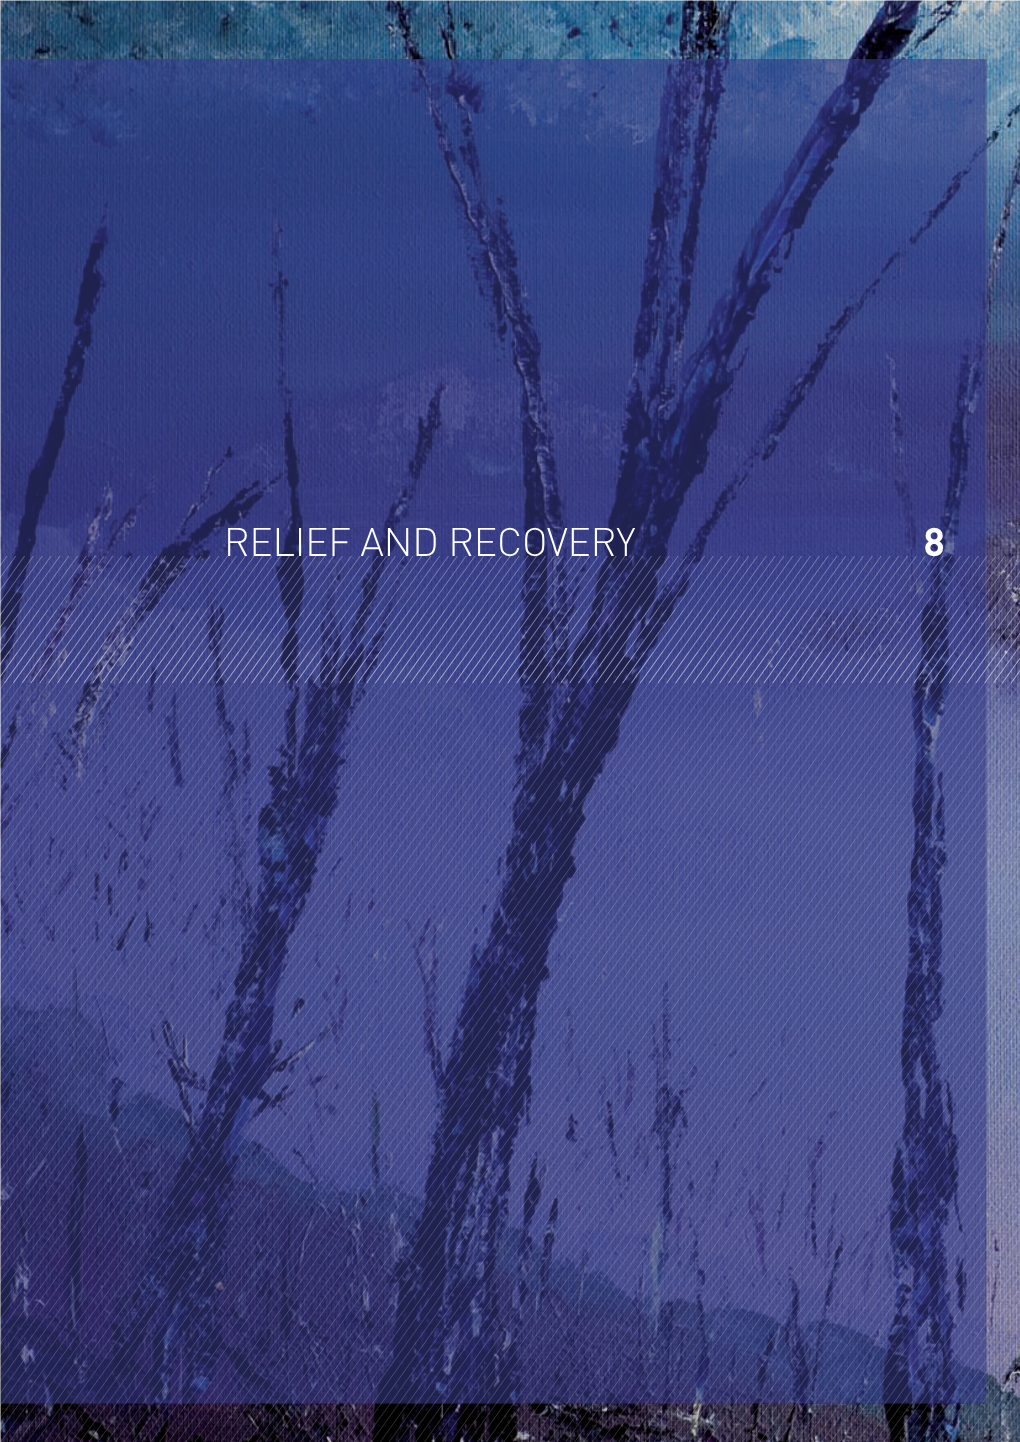 Ch 8 Relief and Recovery 2086 Kb